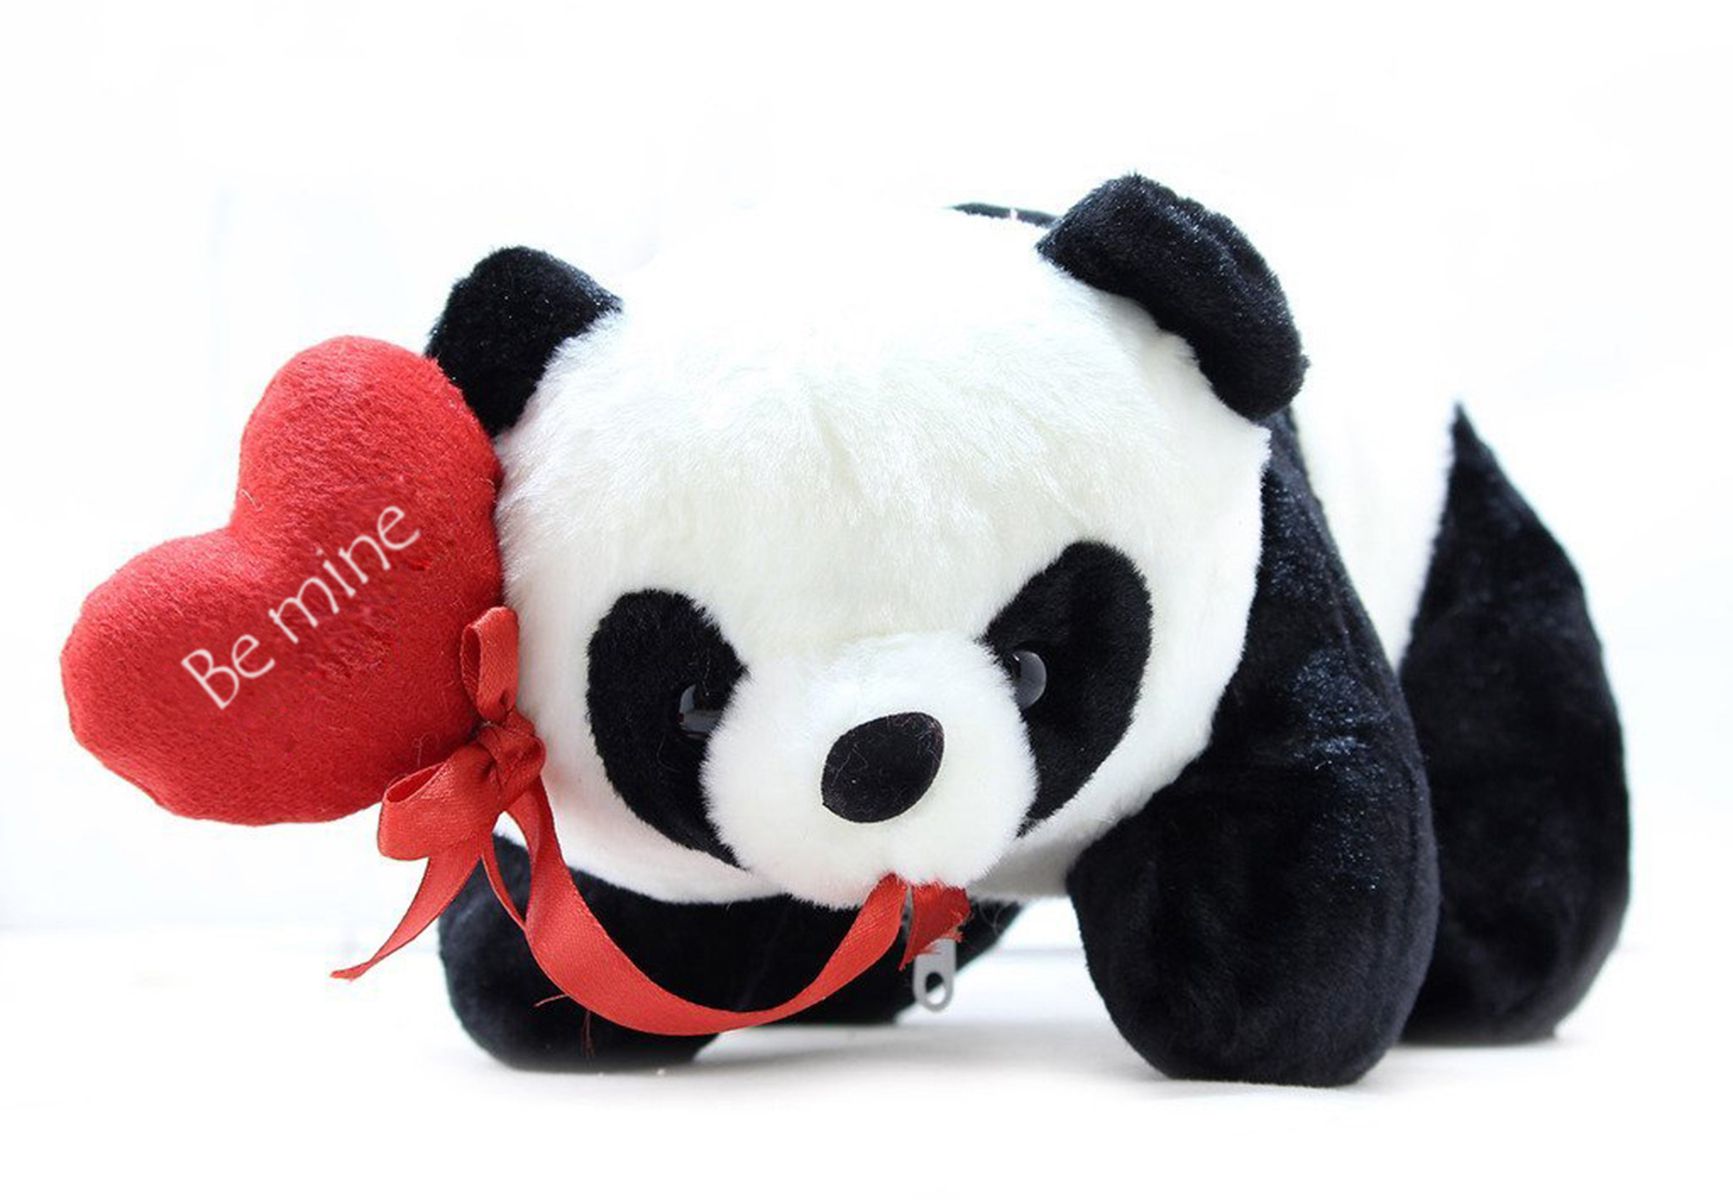     			Tickles Soft Stuffed Plush Animal Toy Propose Day Panda with Be Mine Heart Valentine Gift for Girlfriend Wife Husband Valentine Day (Color: Black and White Size: 26 cm)